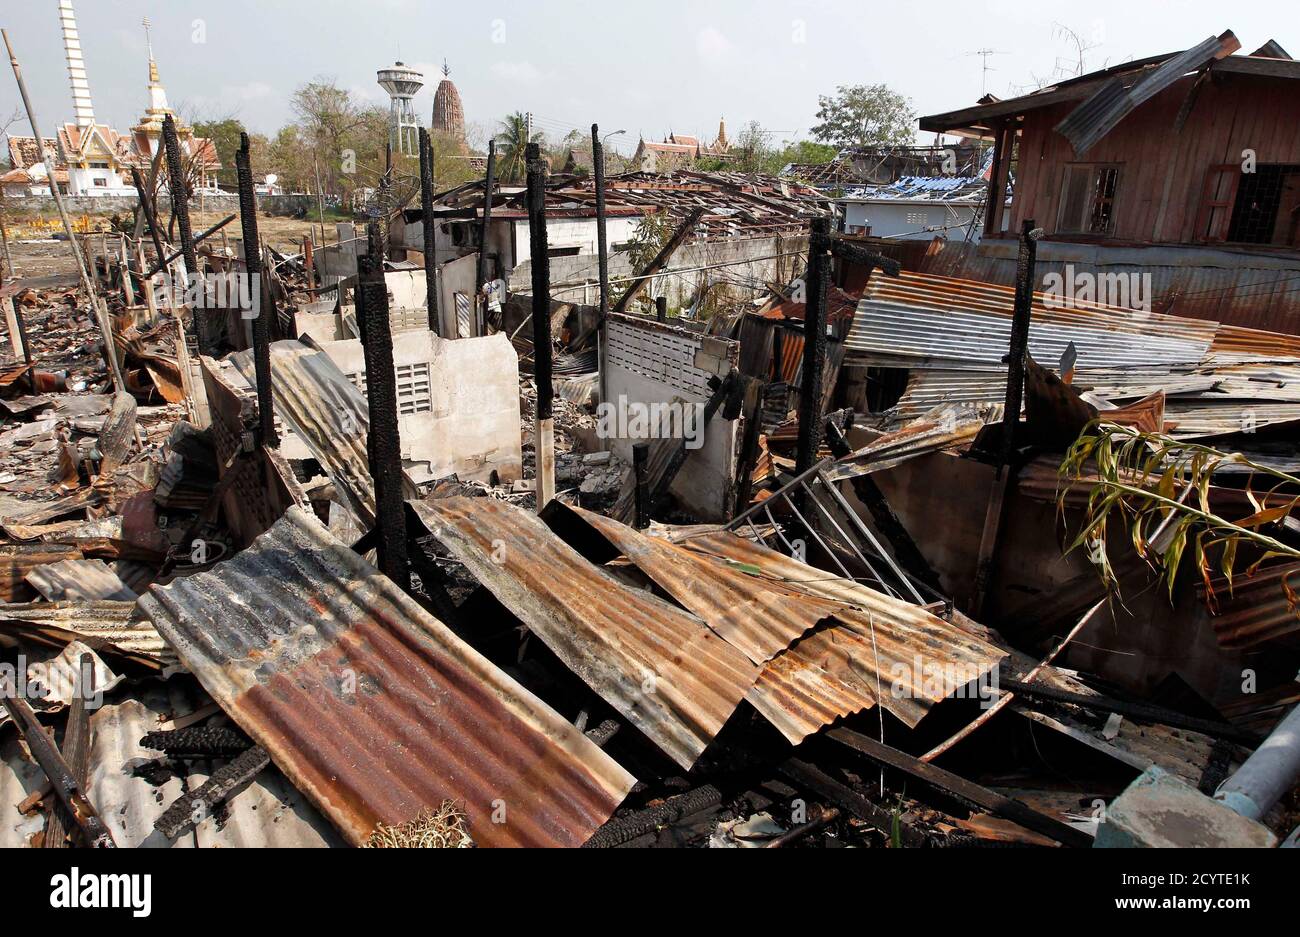 A general view of houses is seen after they were destroyed by fireworks, in Supan Buri province January 25, 2012. A Lunar New Year fireworks display got out of control on Tuesday night, resulting in the deaths of four people with many injured and about 50 houses set ablaze, an official said.      REUTERS/Sukree Sukplang (THAILAND - Tags: DISASTER SOCIETY) Stock Photo